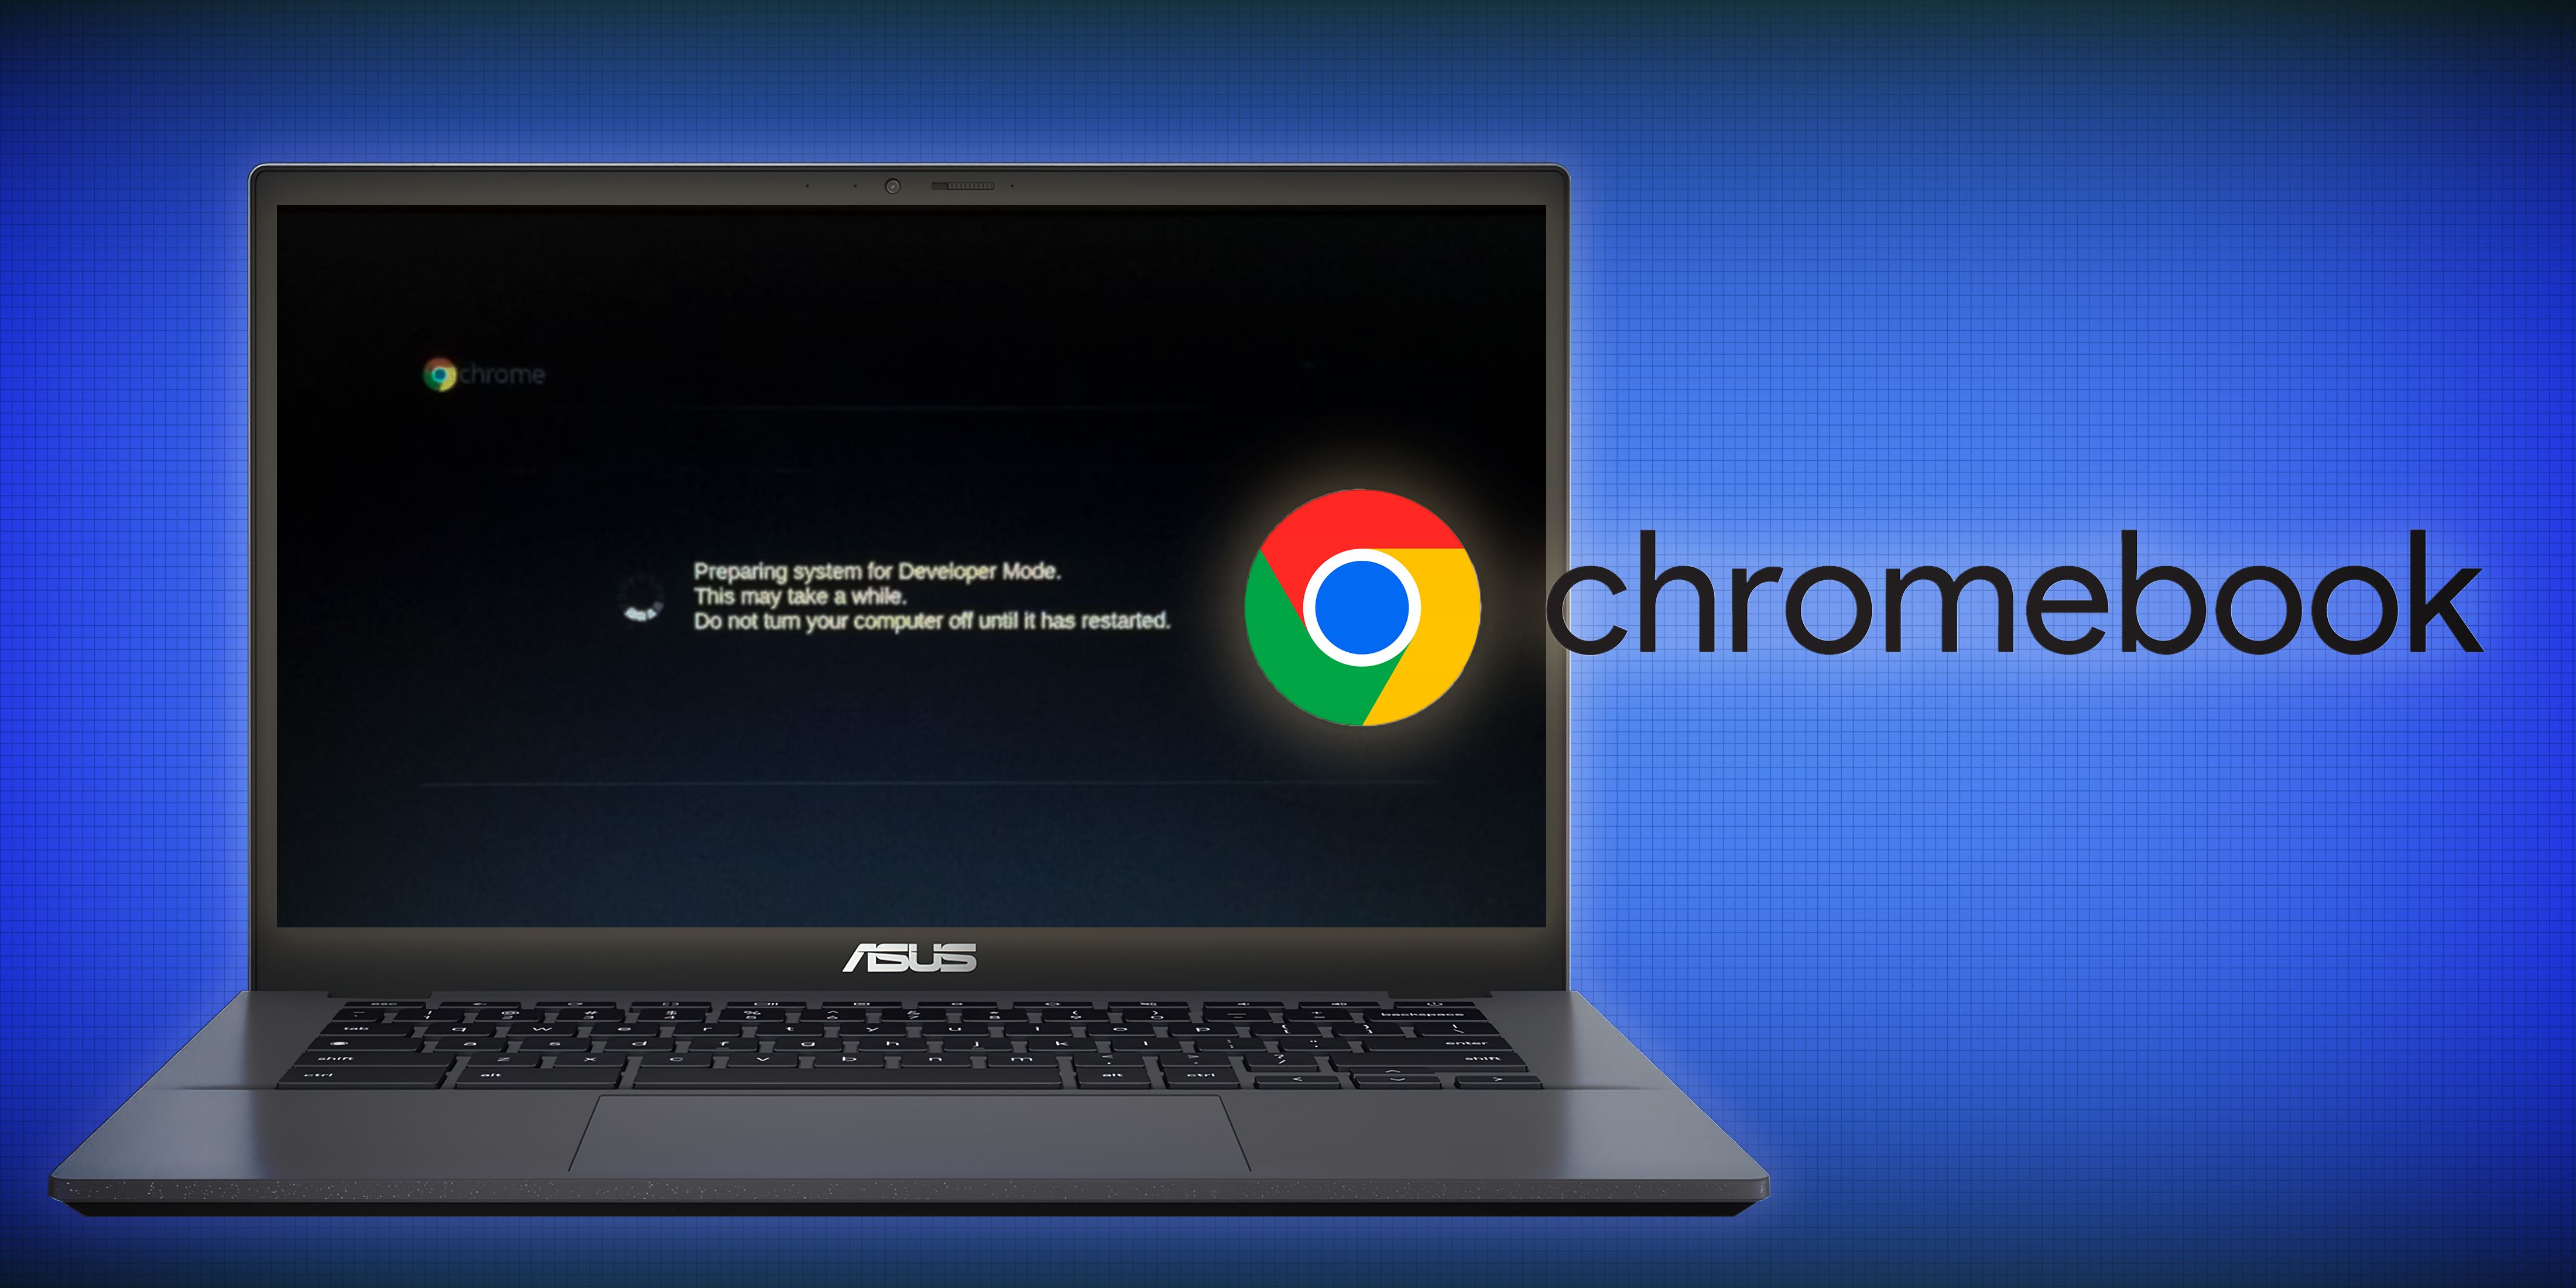 Asus Chromebook displaying a message about preparing for Developer Mode, with a Chrome OS logo and “chromebook” text on blue background.